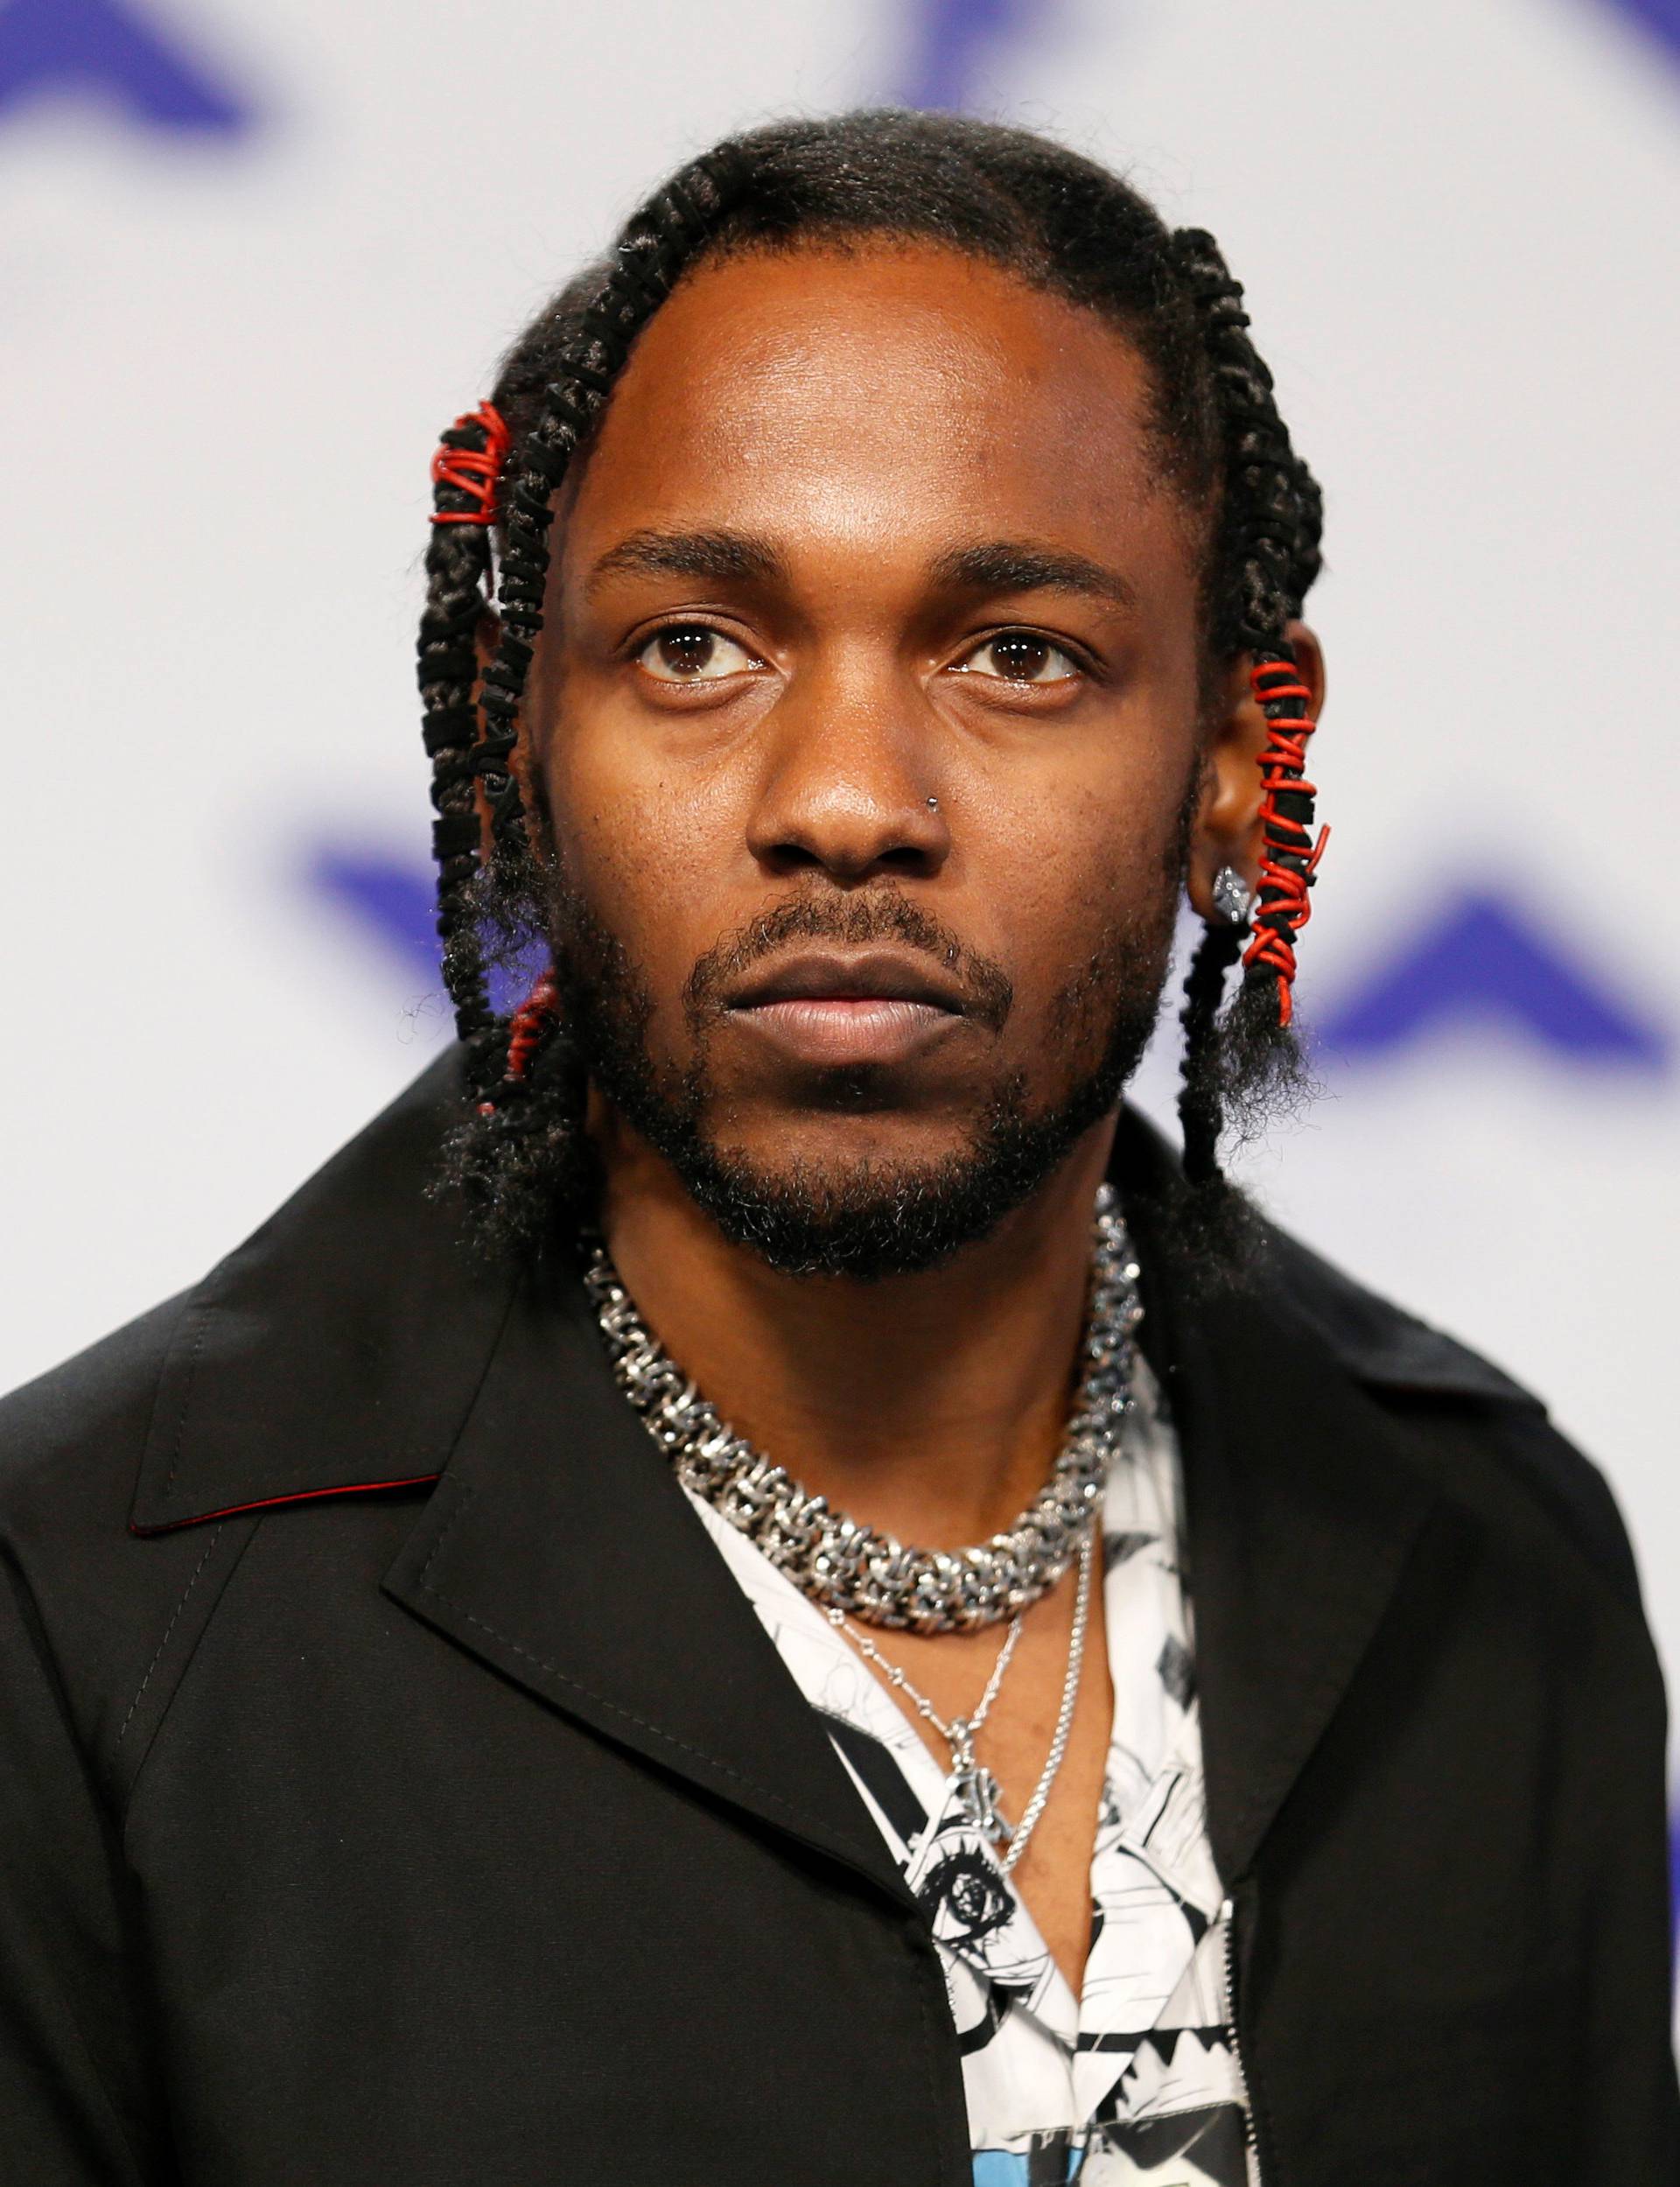 FILE PHOTO: Musician Kendrick Lamar arrives at the 2017 MTV Video Music Awards in Inglewood